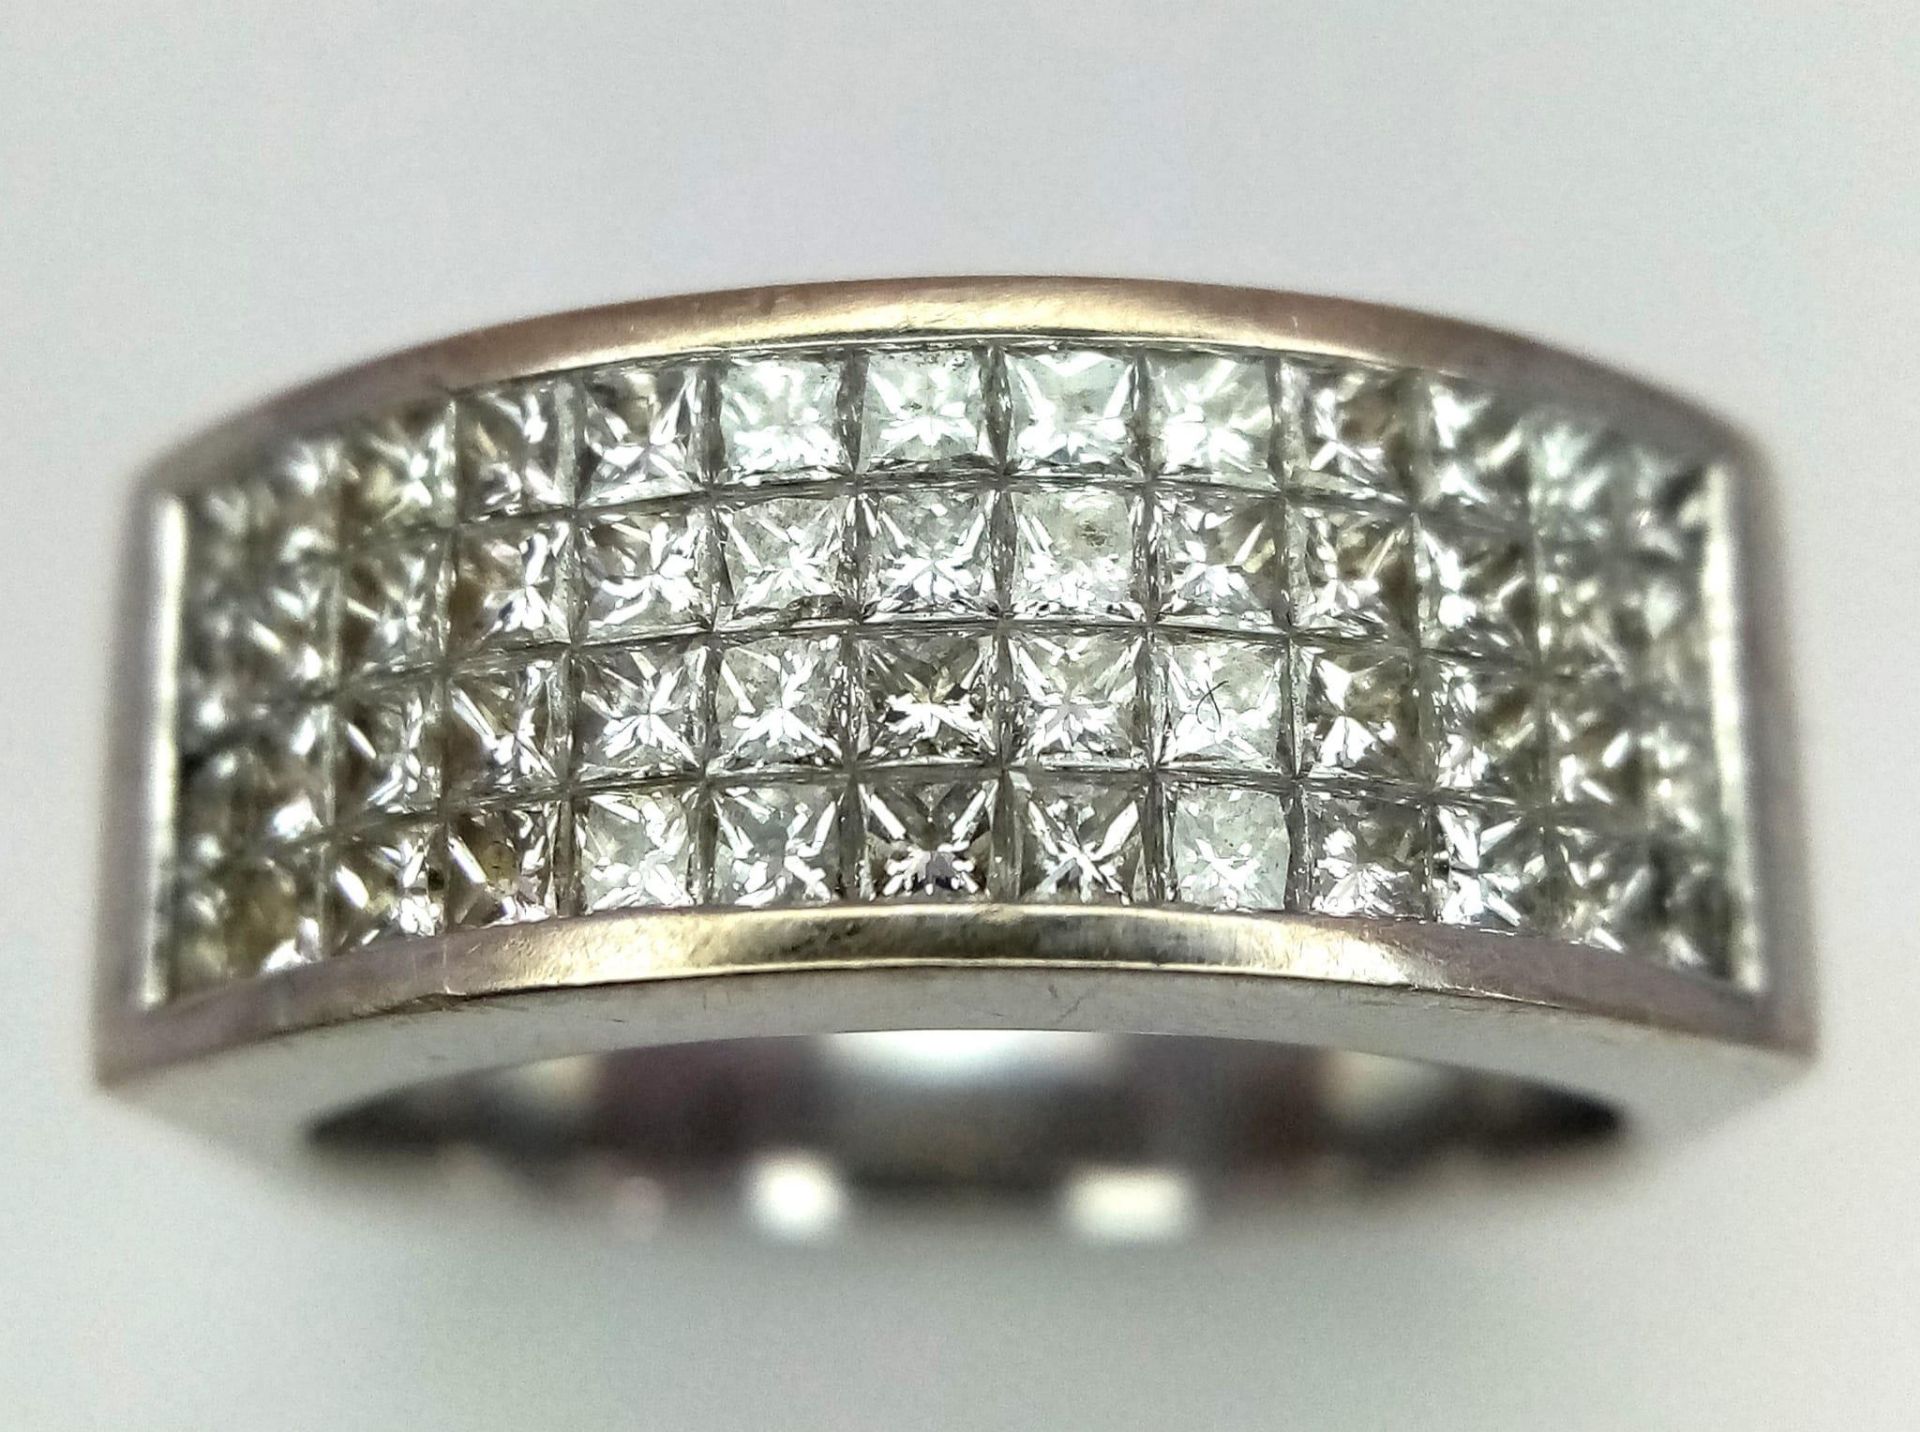 An 18 K white gold ring with four diamond bands. Size: P, weight: 12.3 g. 14272